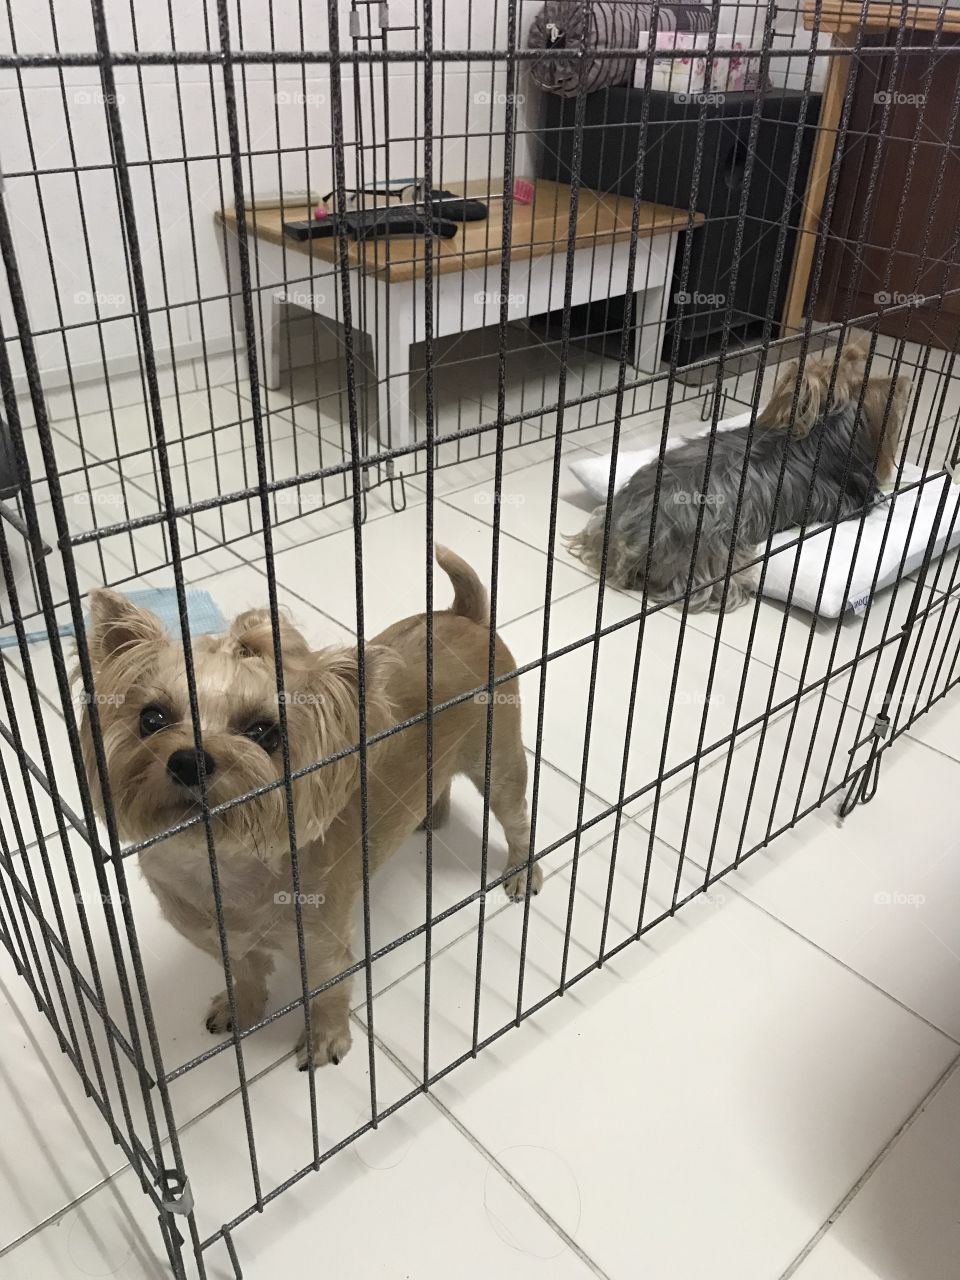 My dogs are in the cage.